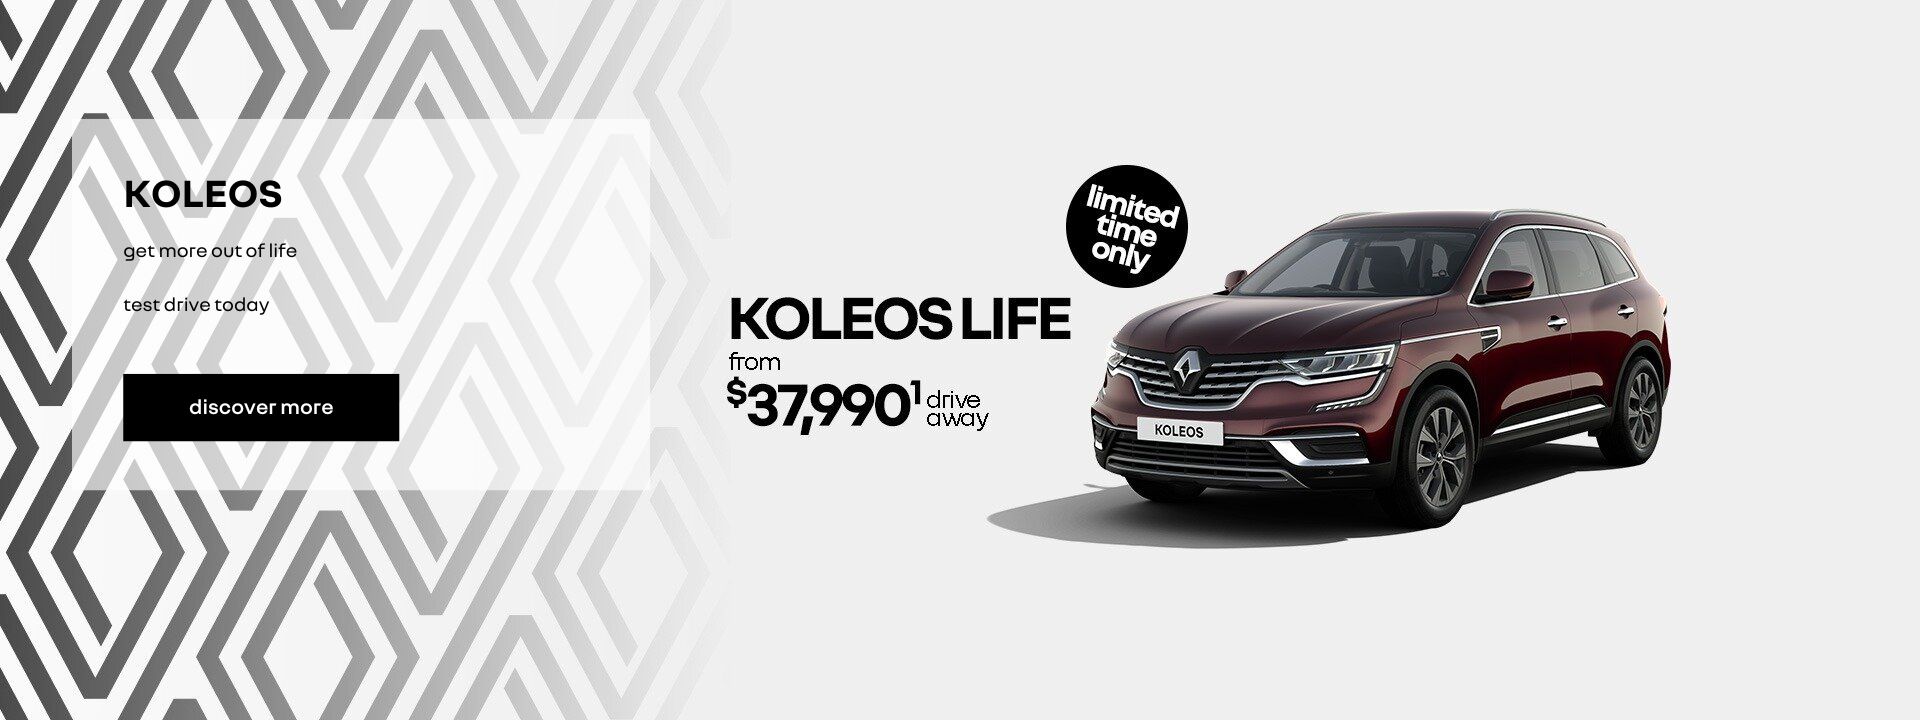 Koleos Life. from $37,990 drive away. limited time only.